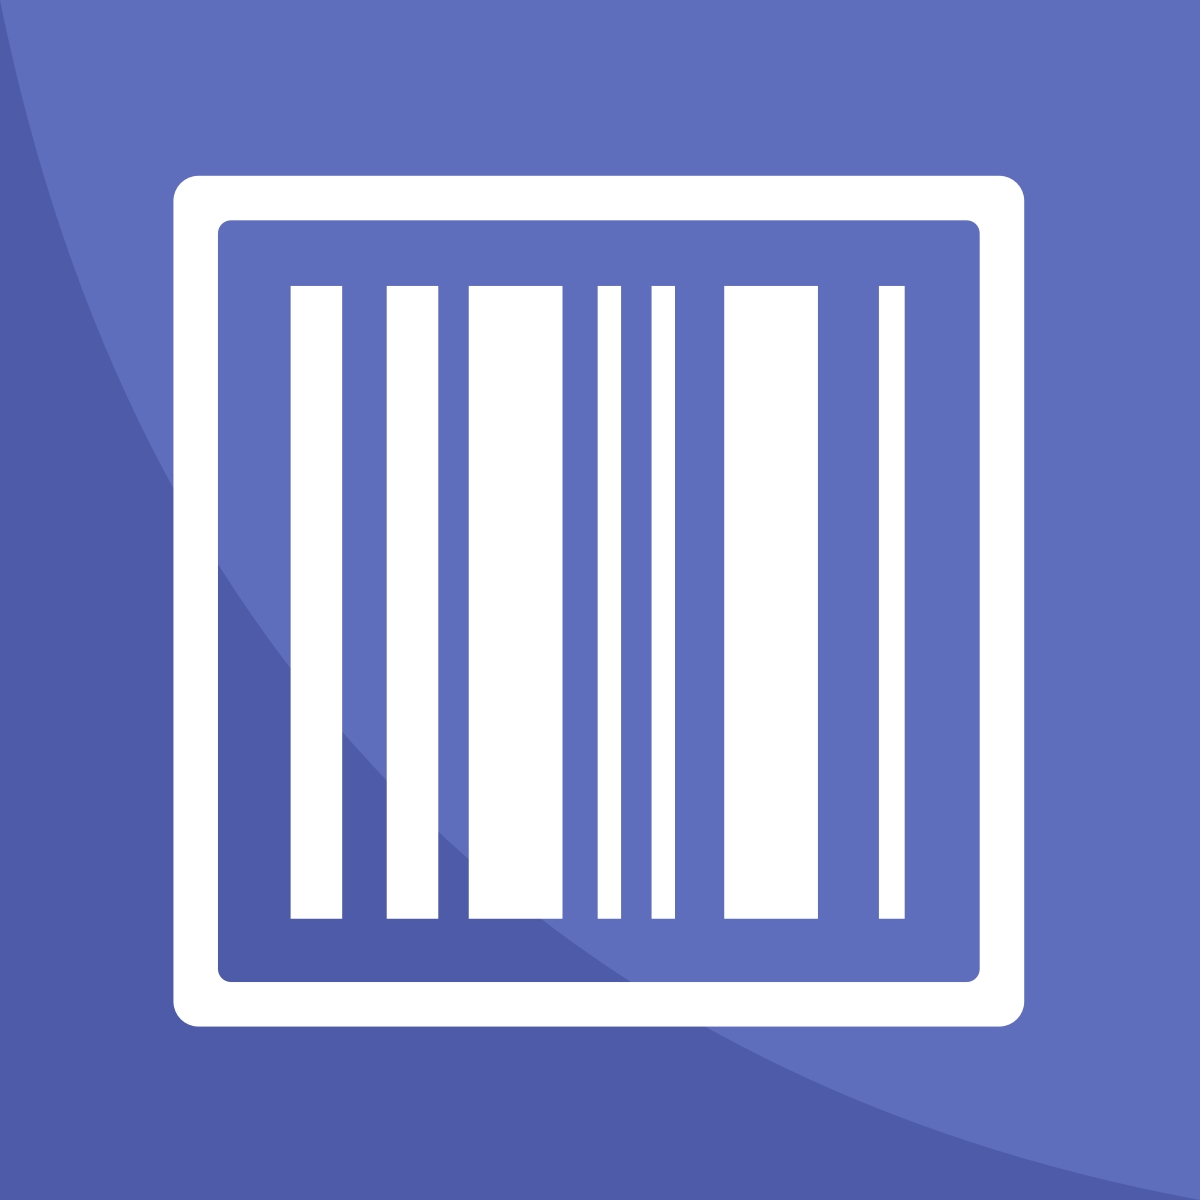 Shopify Barcode Printer & Generator Apps by Shopify